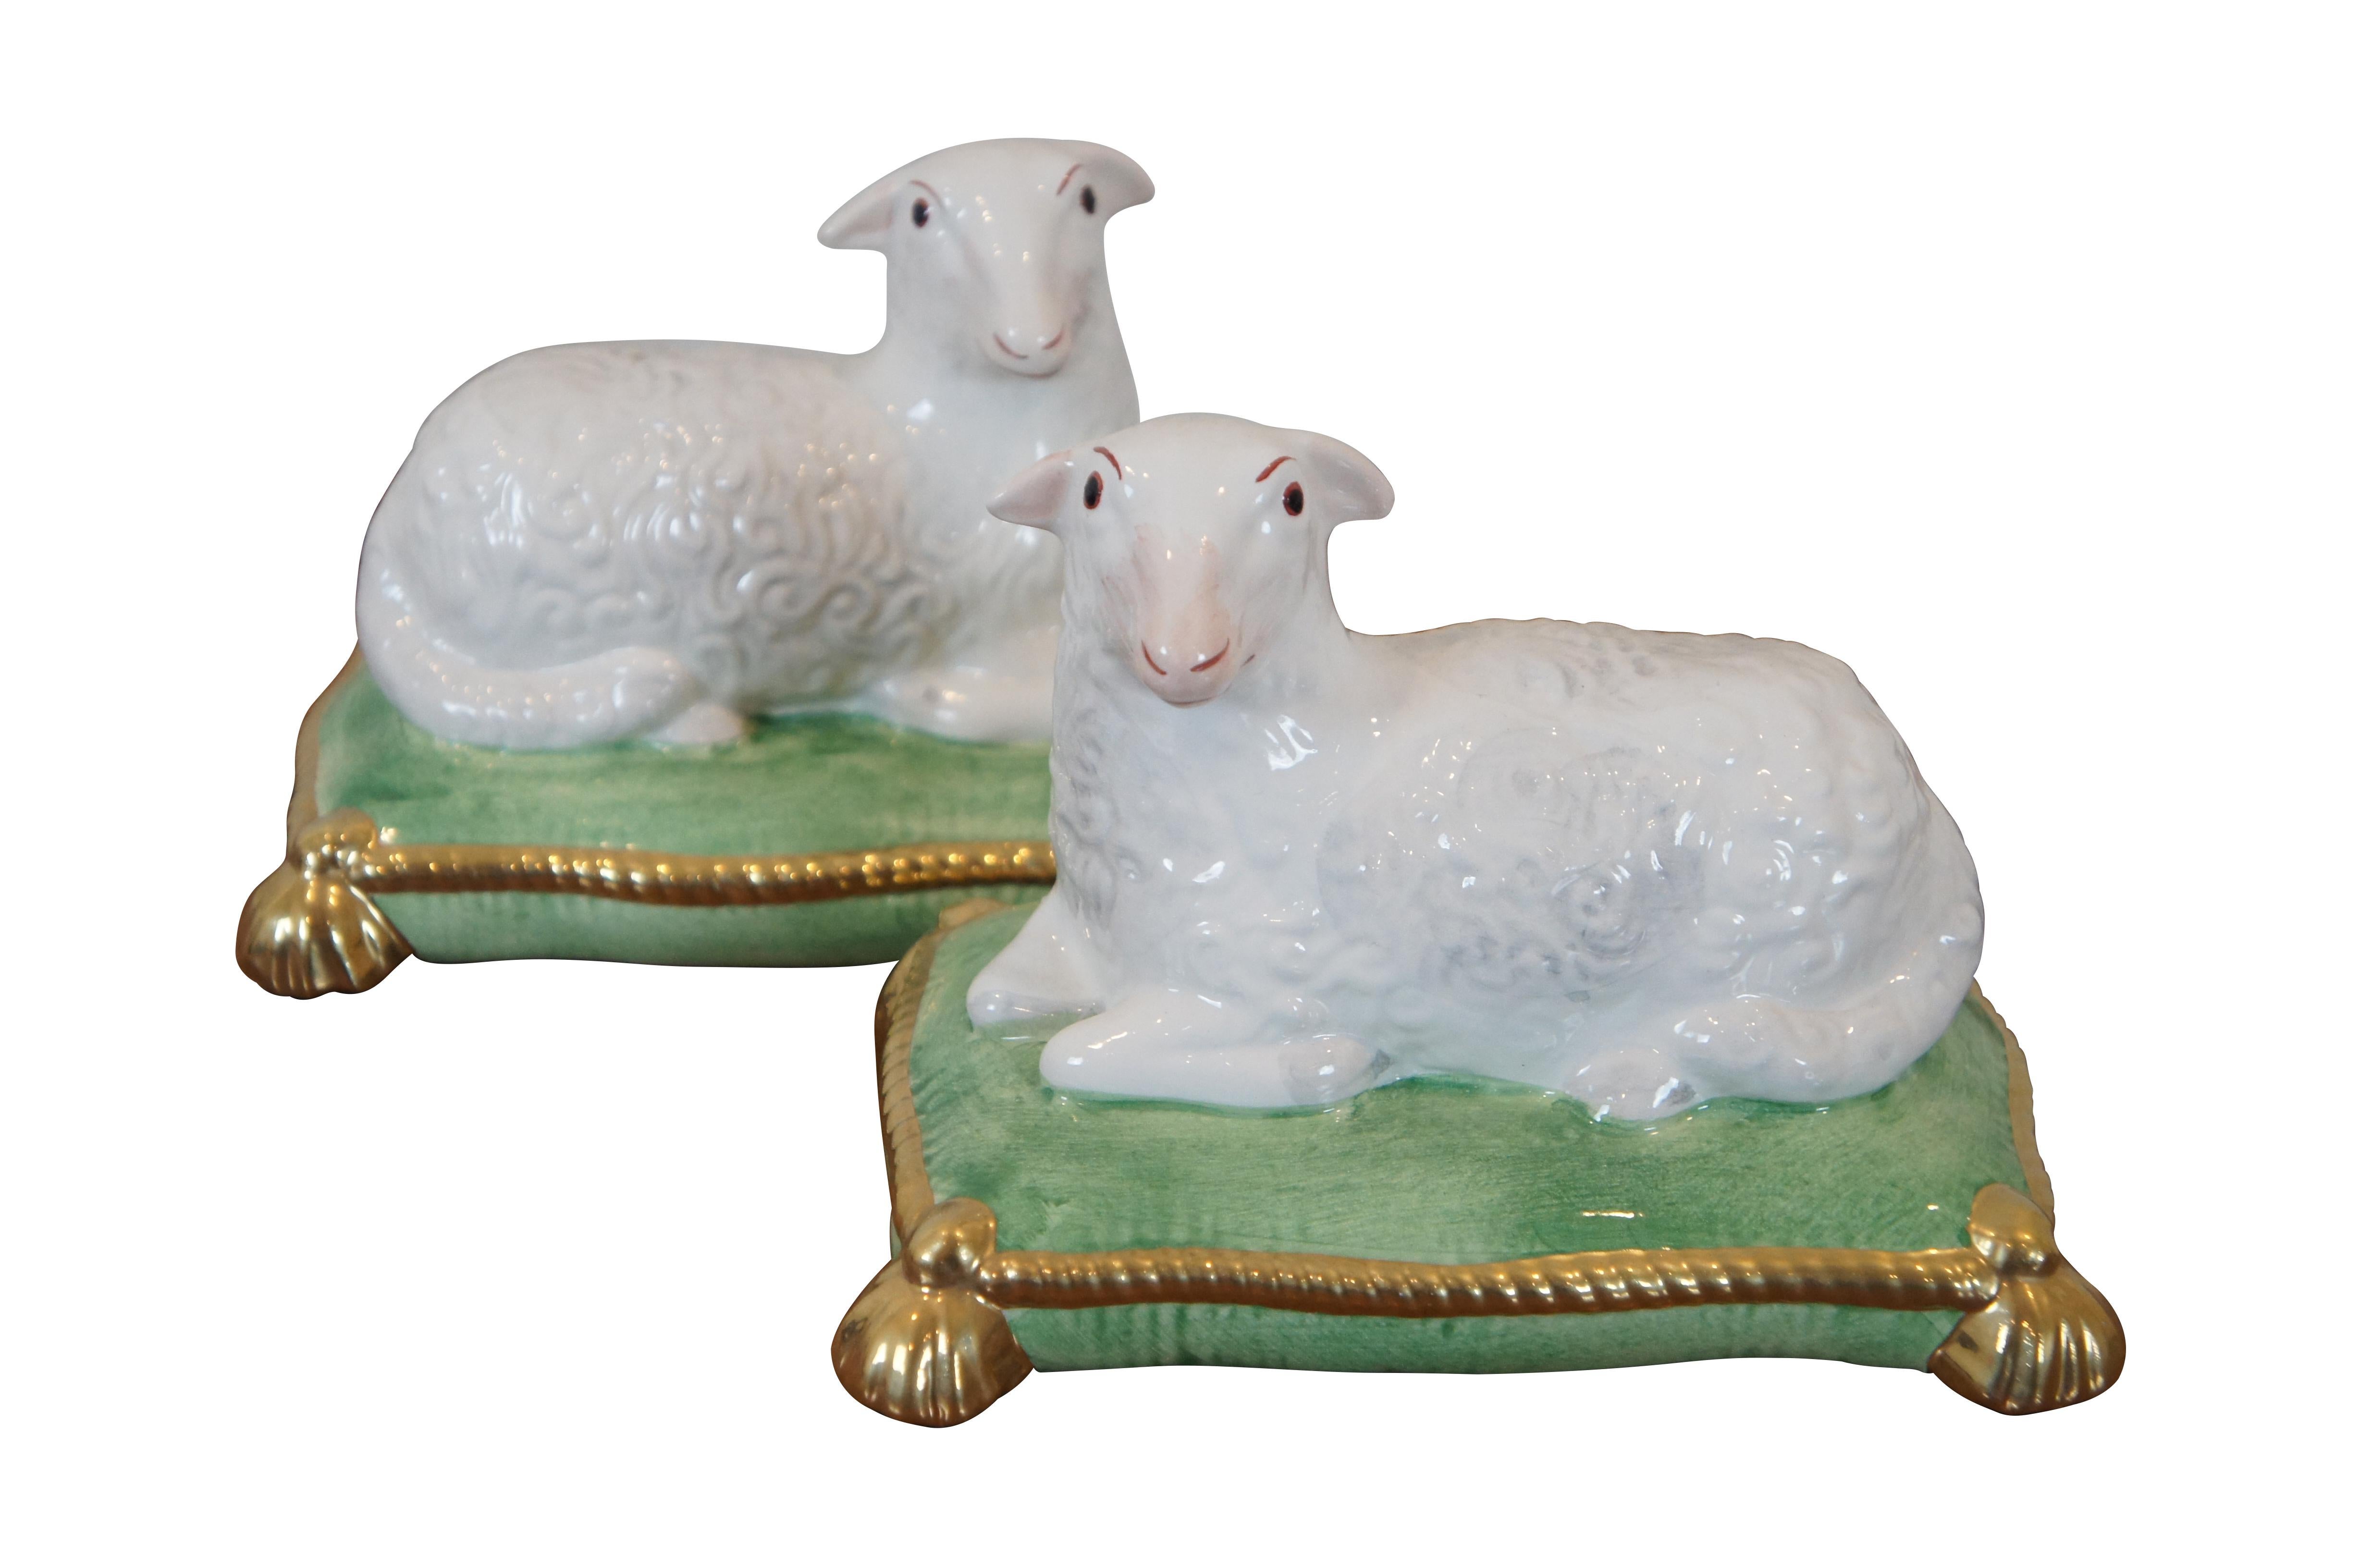 Pair of vintage Chelsea House hand painted porcelain figurines in the shape of sheep or lambs reclining on green cushions trimmed in gold. In the style of 19th century Staffordshire figurines. Made in Italy.

Dimensions:
6.25” x 4.5” x 4.75” (Width